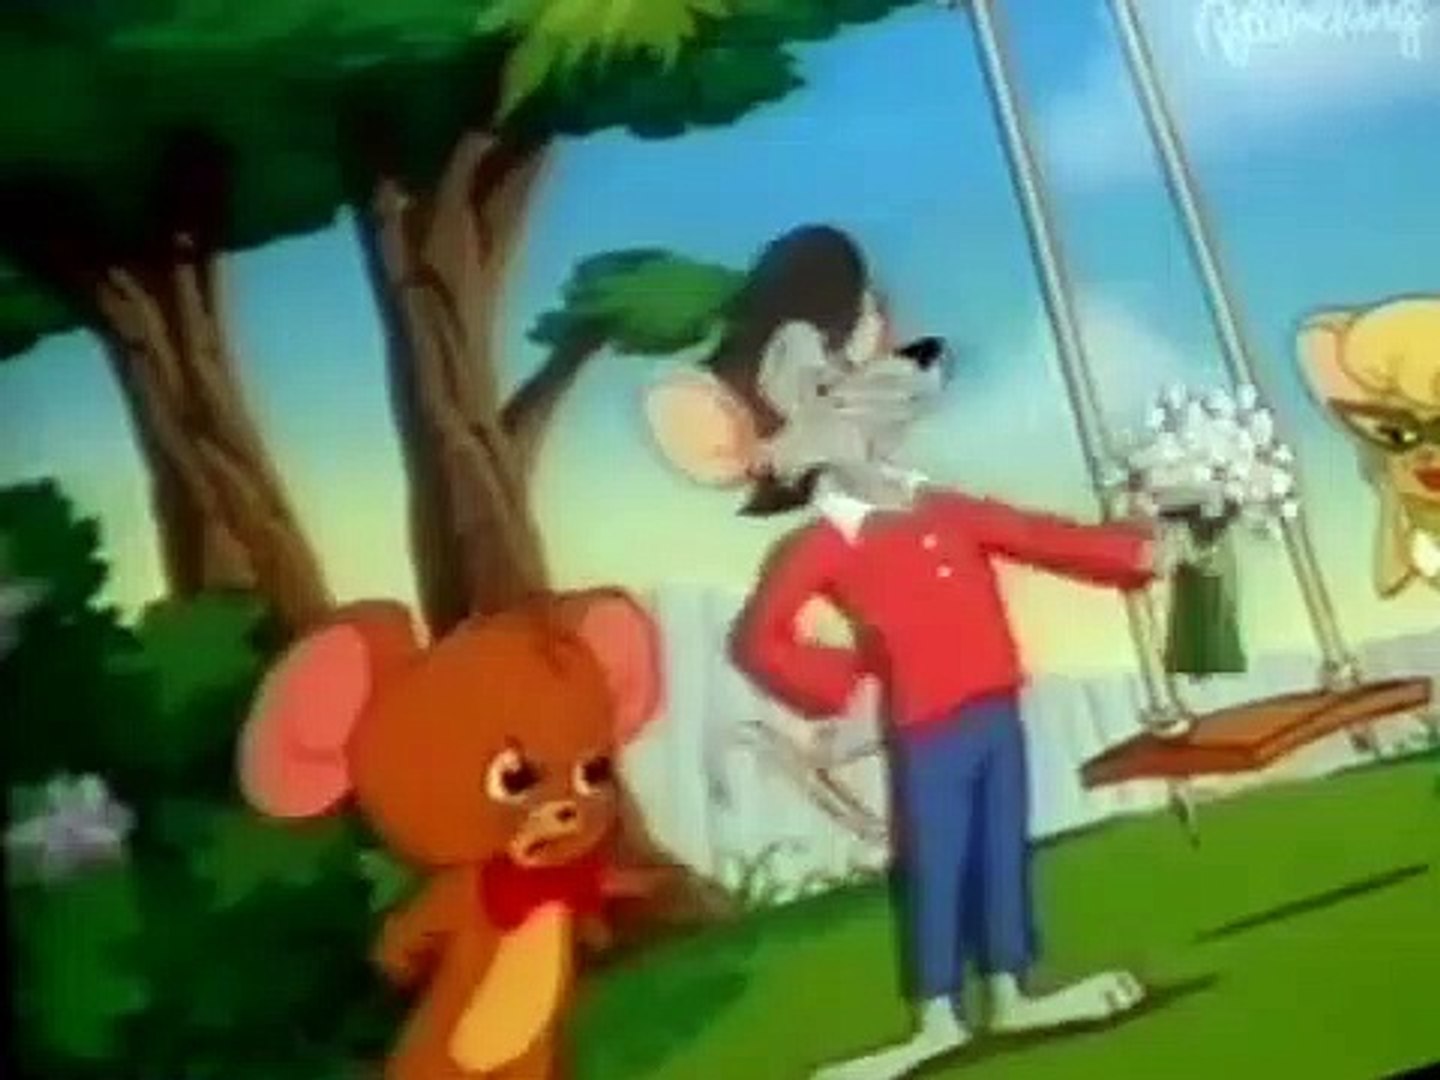 Catch that Mouse, Tom and Jerry Kids Show Wiki